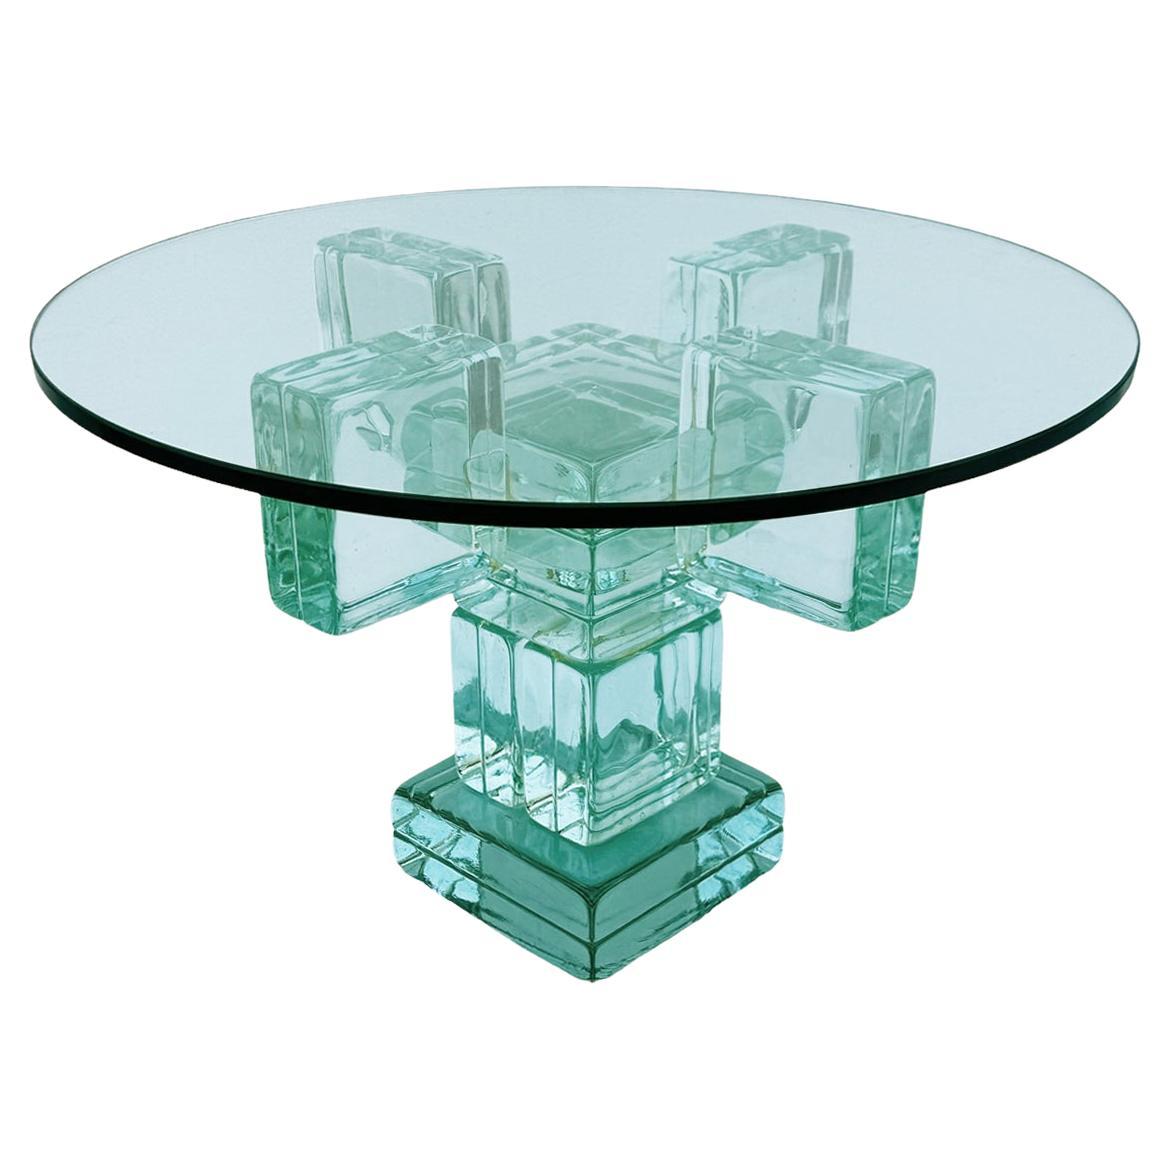 Midcentury Postmodern Clear Glass Block End Table or Side Table after Sottsass